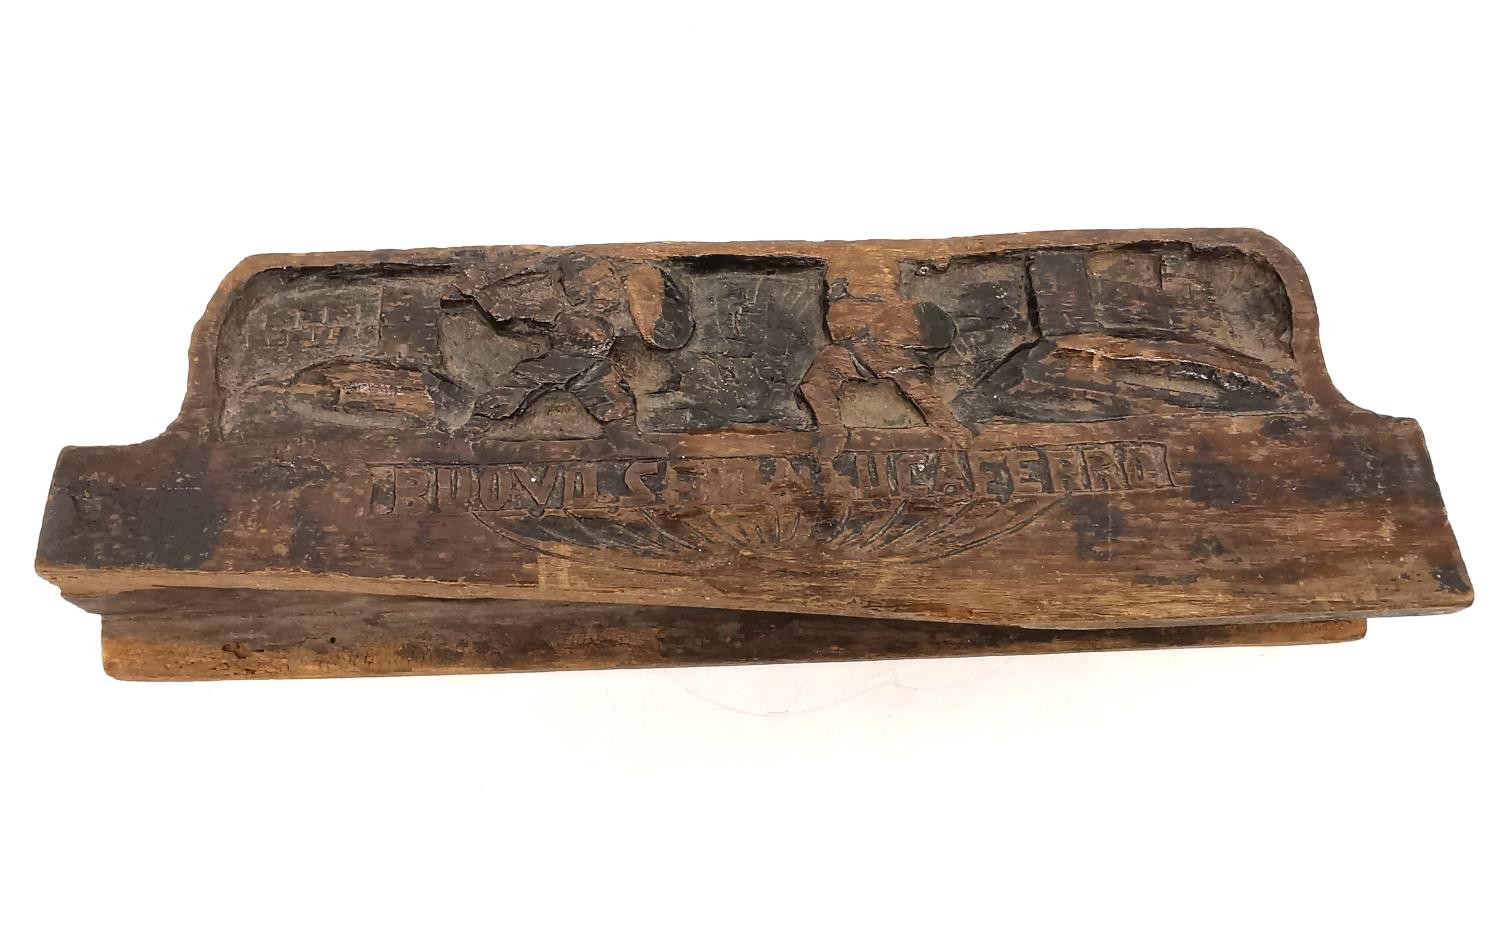 A 19th century decorative Italian wood carving possibly a small lintel or Sicilian cart fragment. - Image 3 of 7